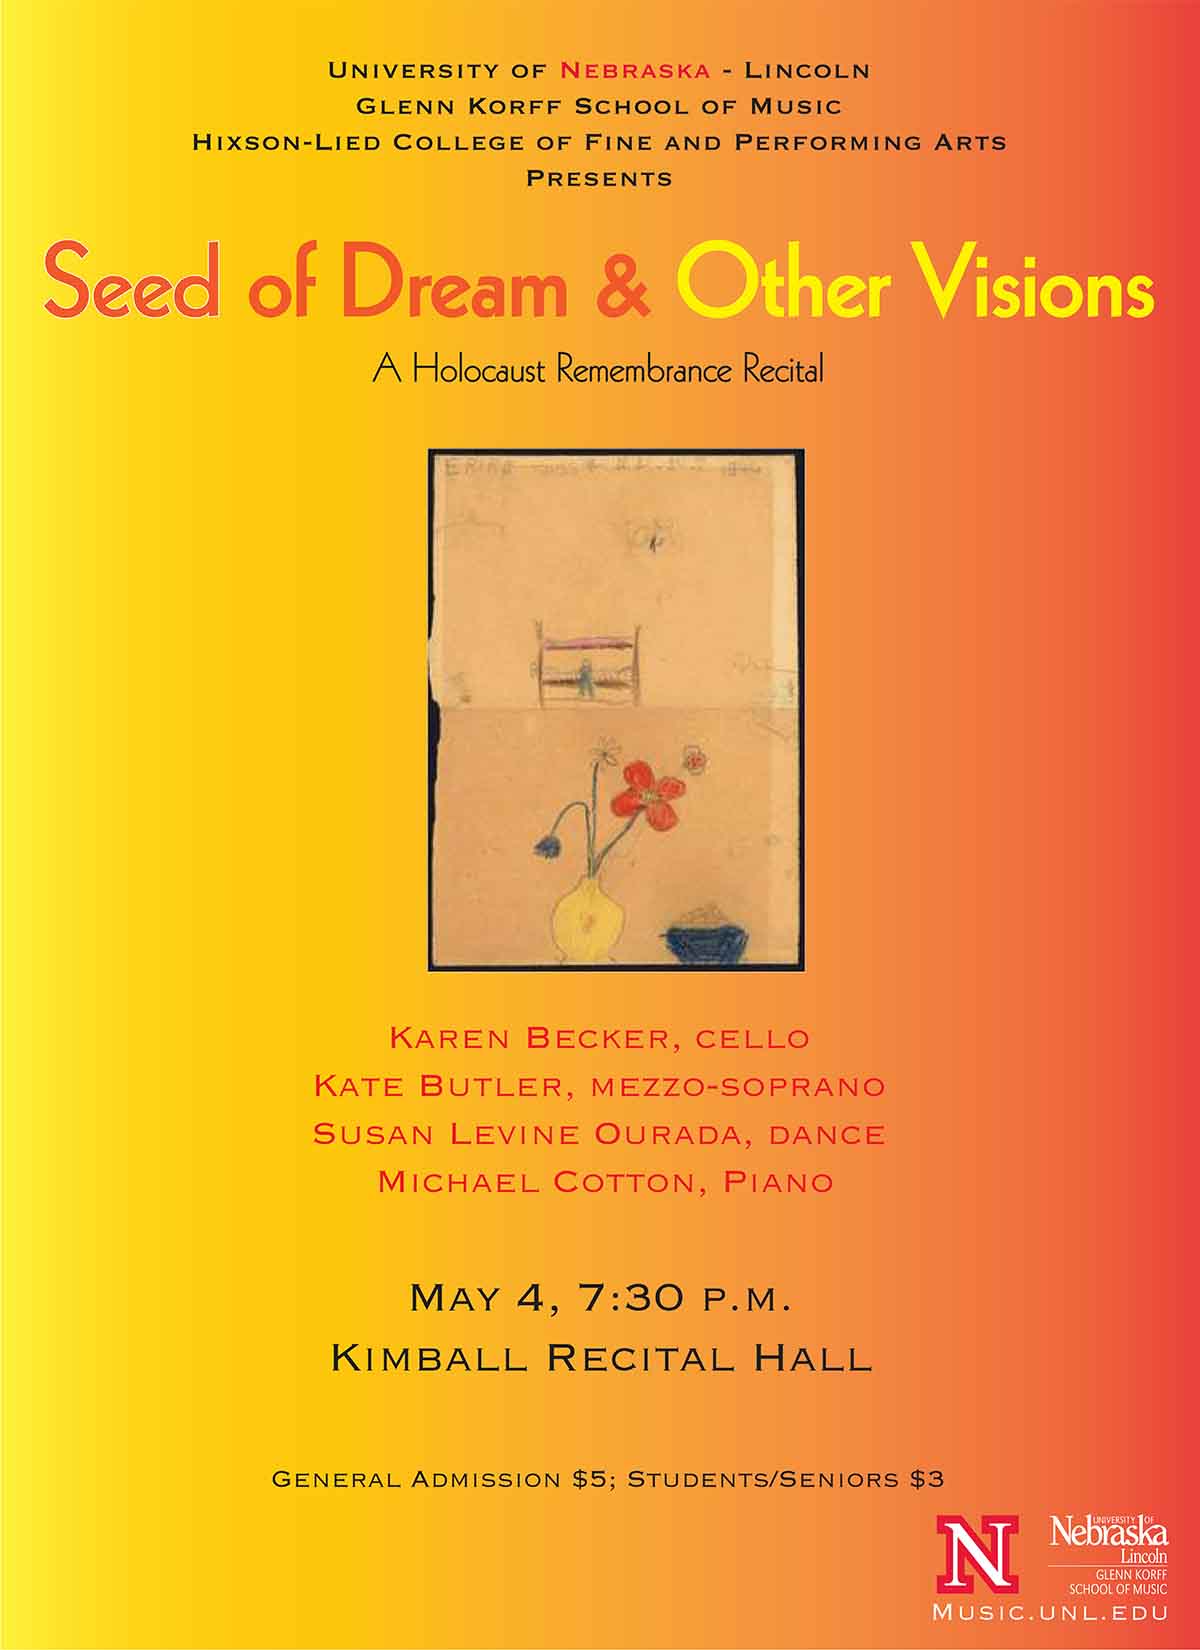 University of Nebraska-Lincoln Glenn Korff School of Music faculty members Karen Becker, cello, Kate Butler, mezzo-soprano and Susan Levine Ourada, dance; with Michael Cotton, piano and UNL and SLOdance dancers will present Seed of Dream and Other Visions